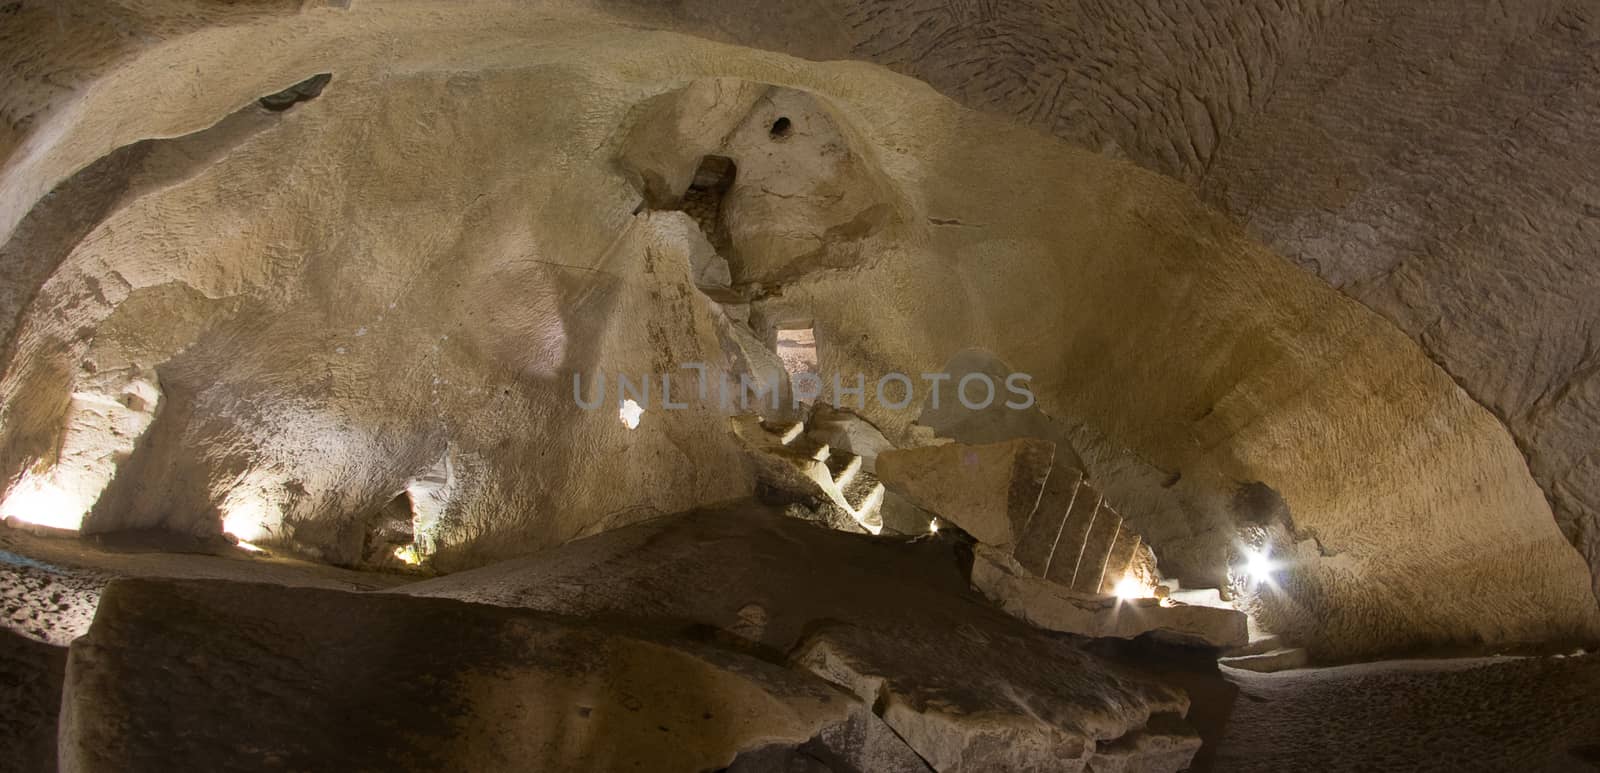 Handmade and natural stone caves in Middle East